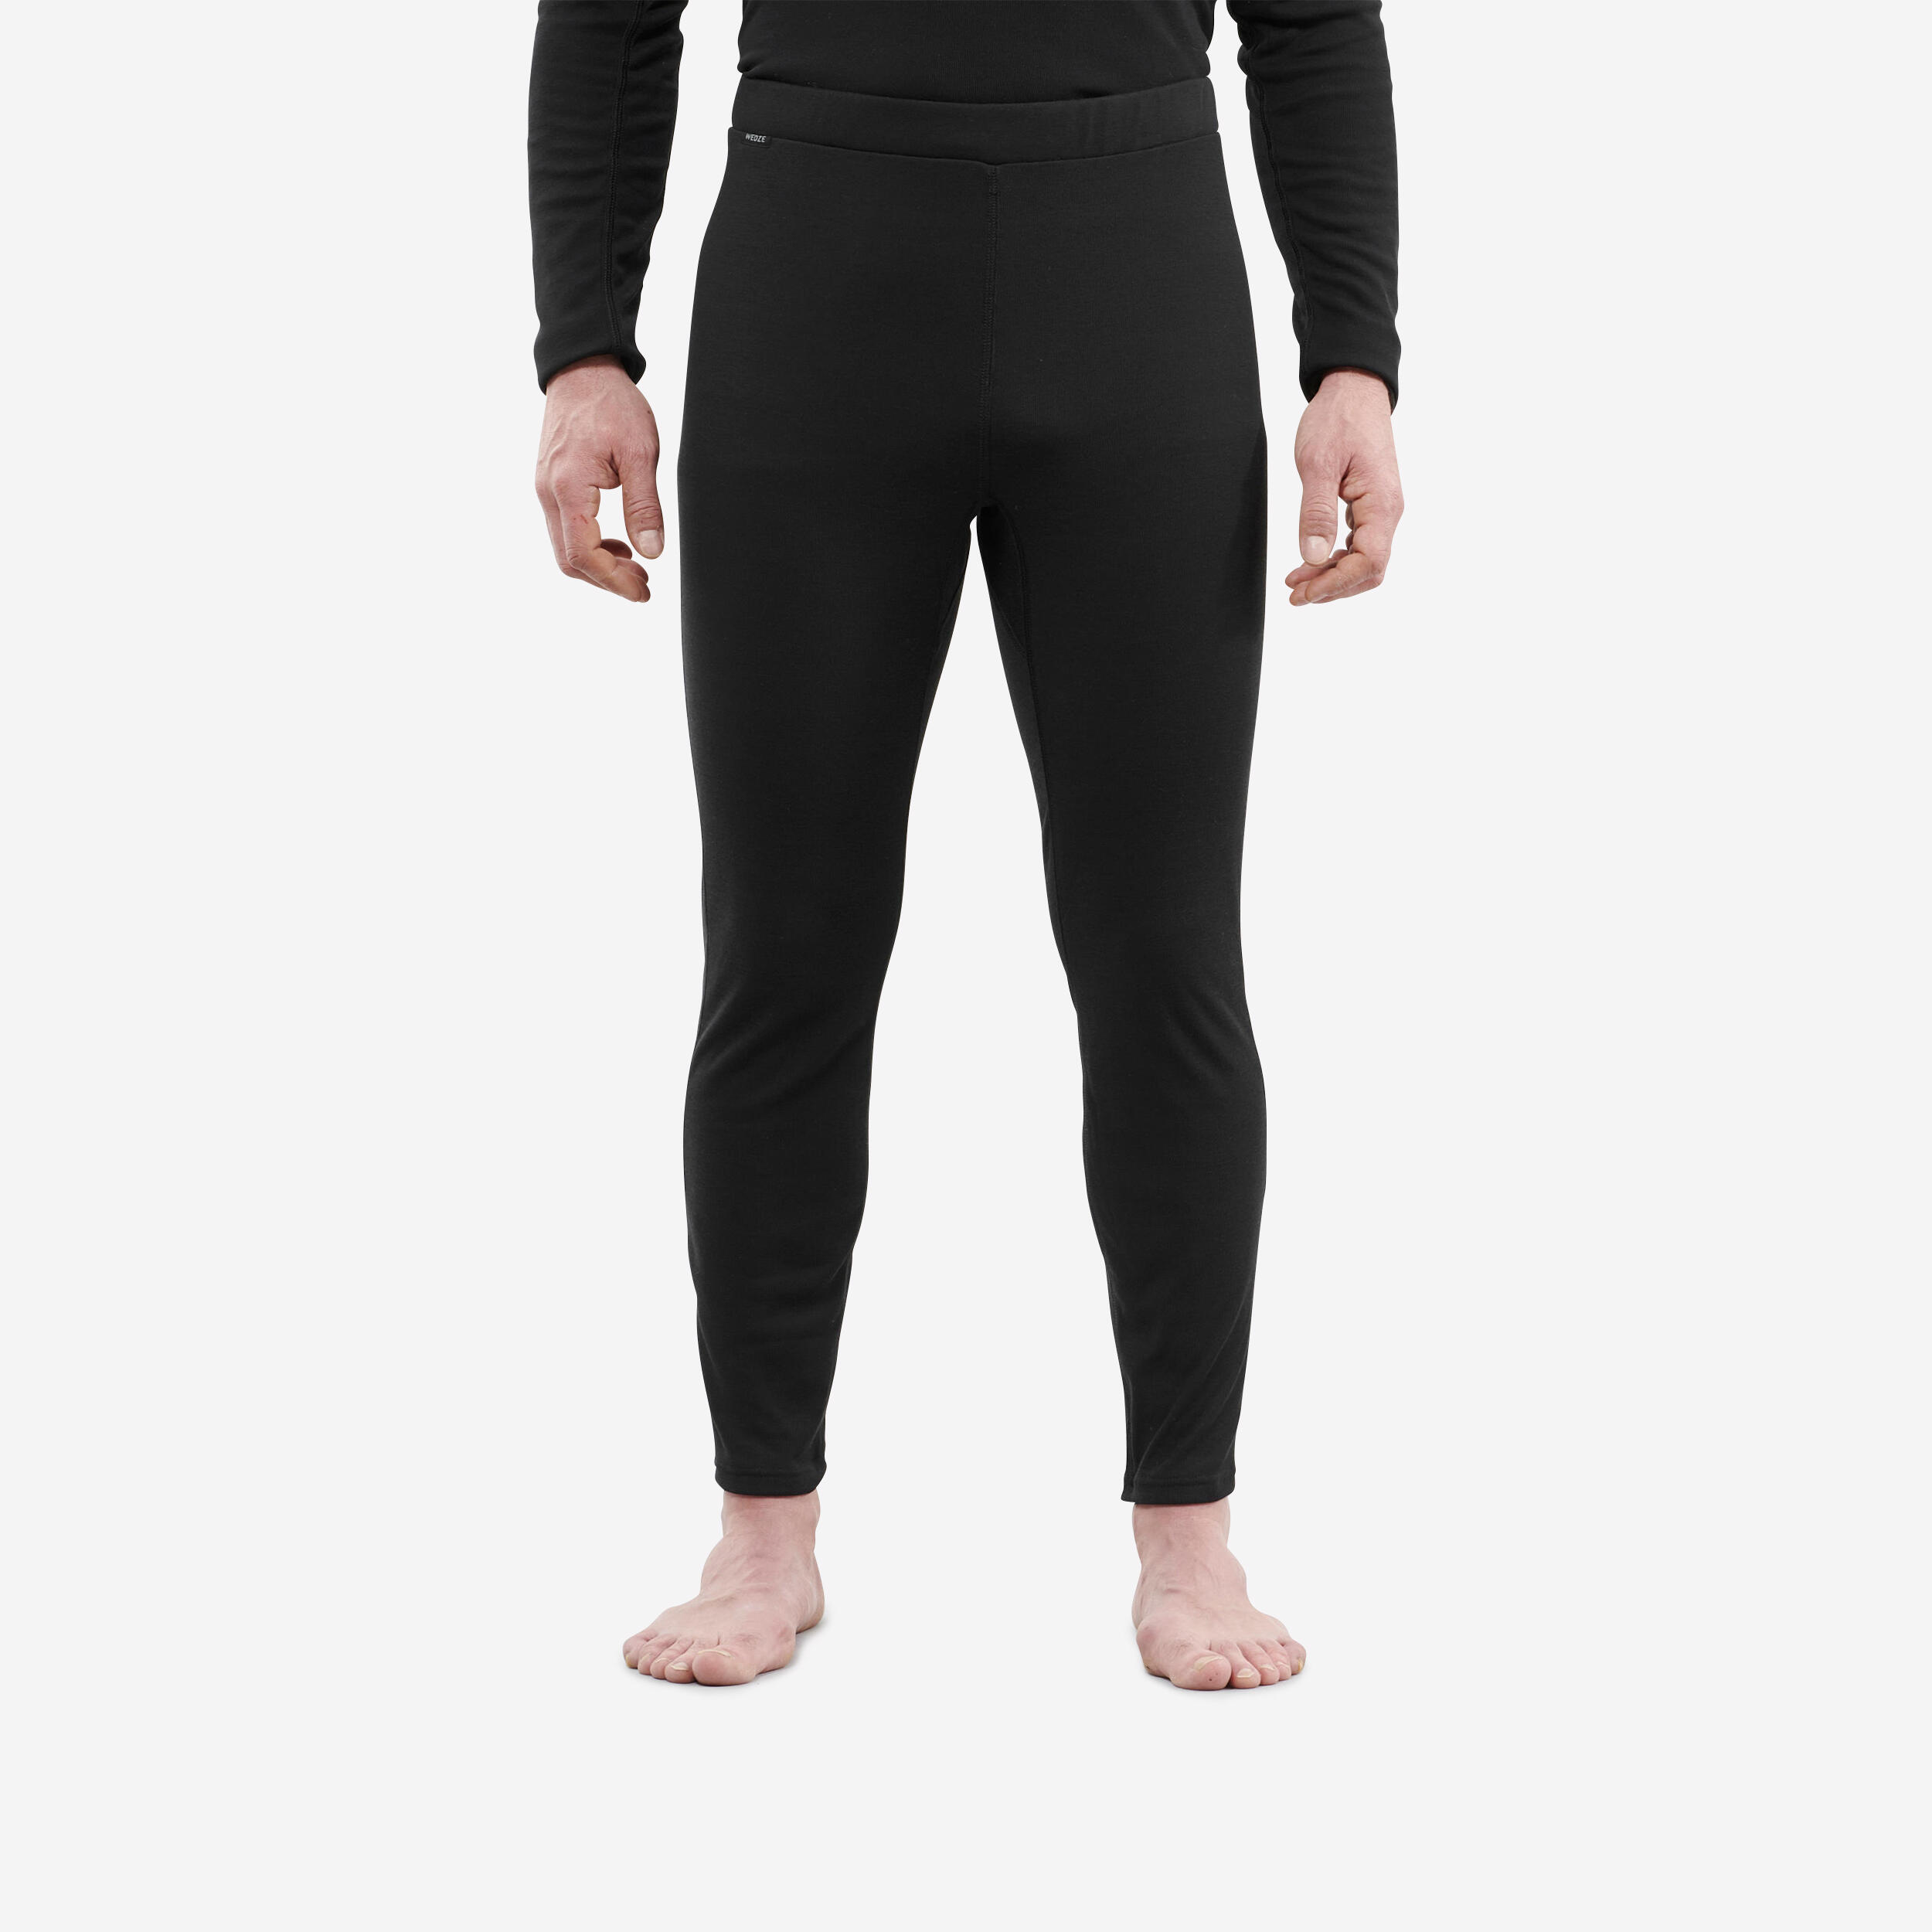 Mens Thermal Underwear Bottoms,Thermal Base Layer Pants 100